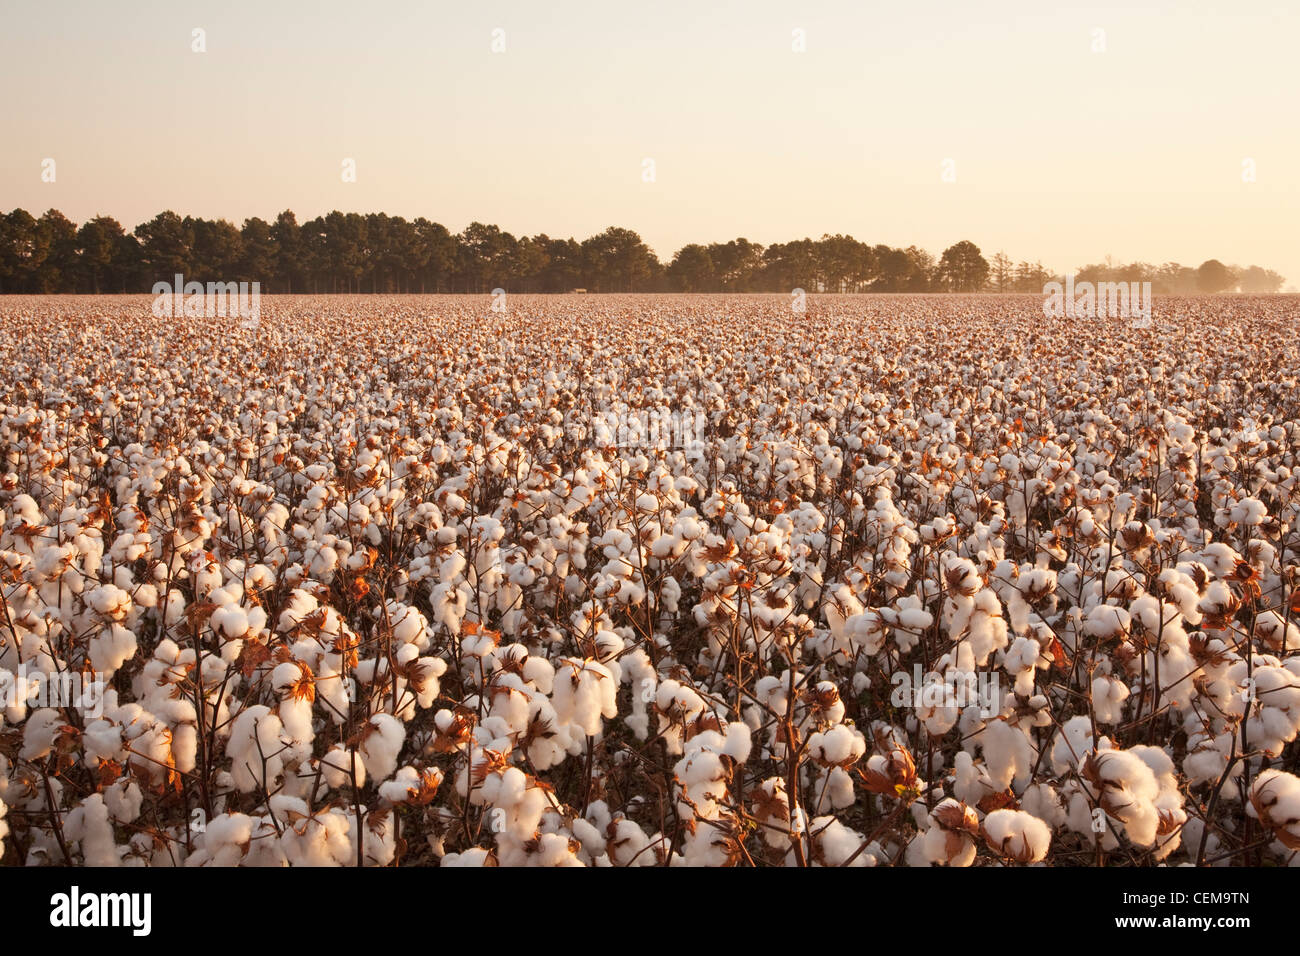 Large field of mature defoliated high-yield cotton plants at harvest stage in early morning Autumn light / Arkansas, USA. Stock Photo